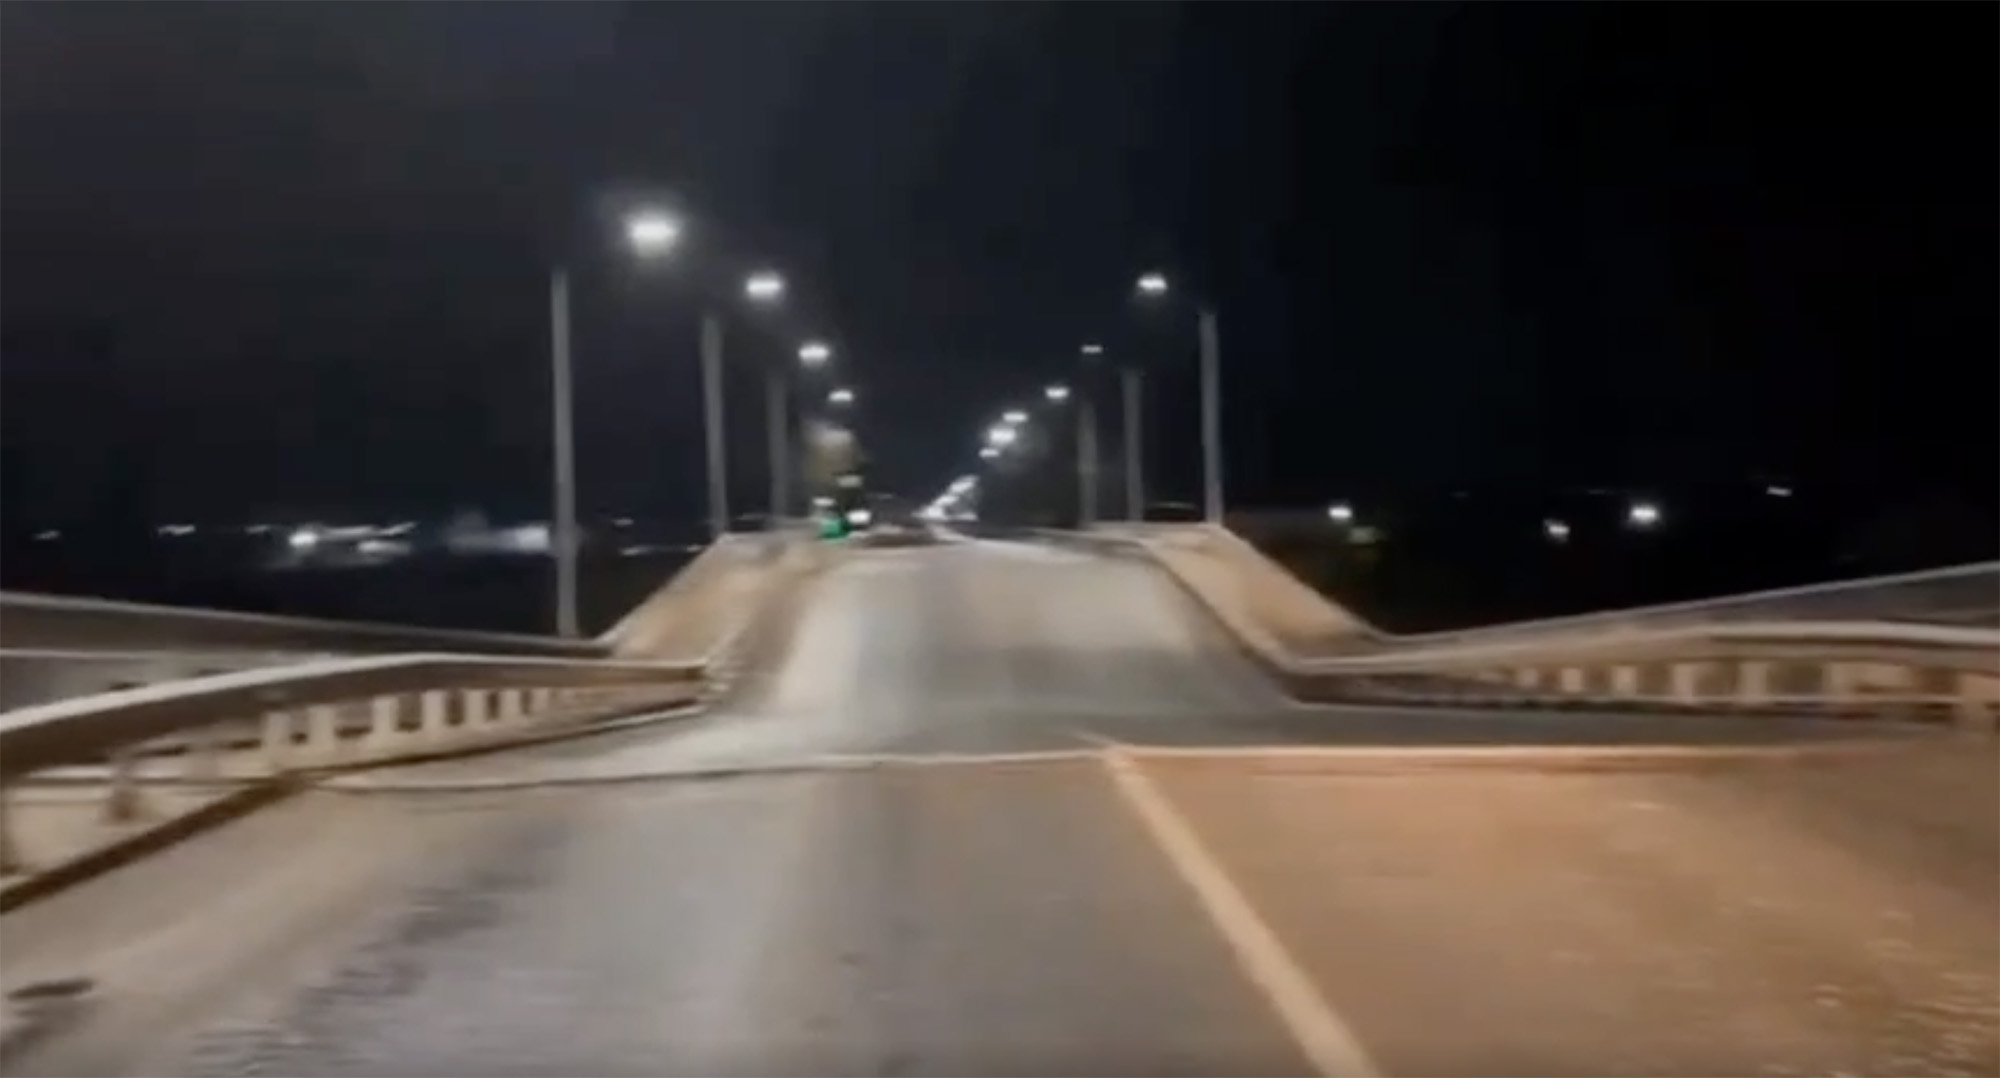 The bridge connecting the main part of the city of Melitopol to a suburb Konstantynivka in an image taken from social media on December 13.